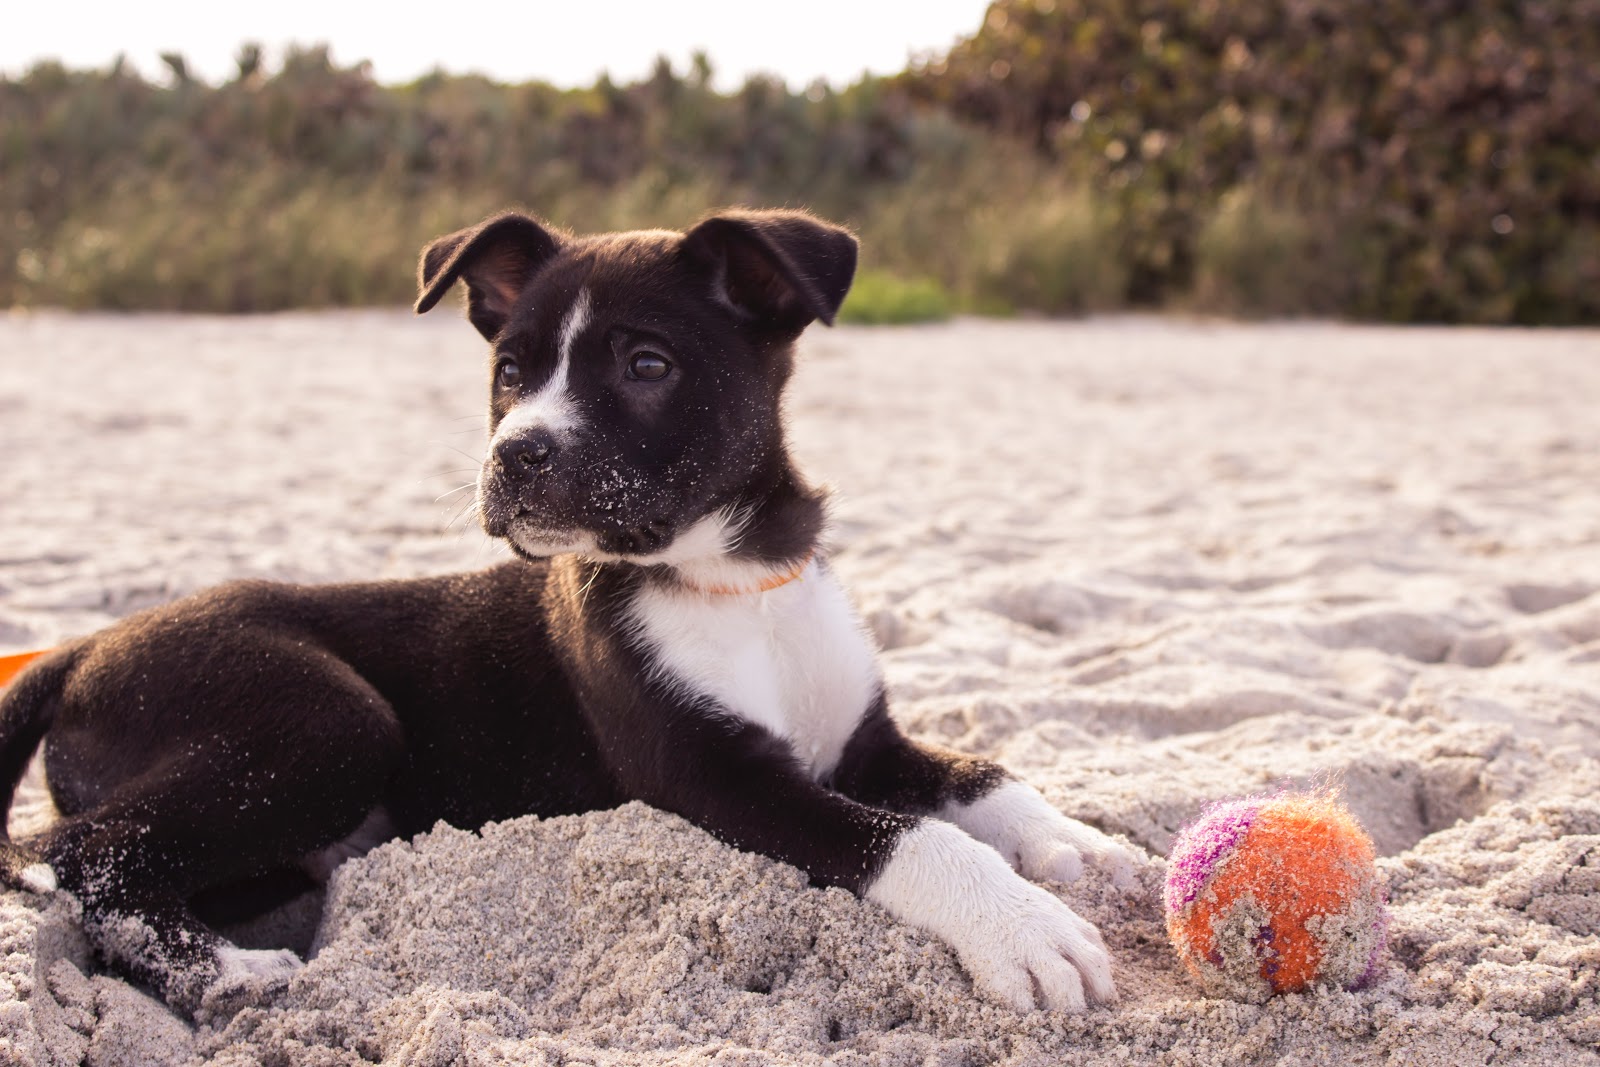 , Pets:  How to Prepare For the Arrival of a New Puppy (+ Cute Puppy Photos)